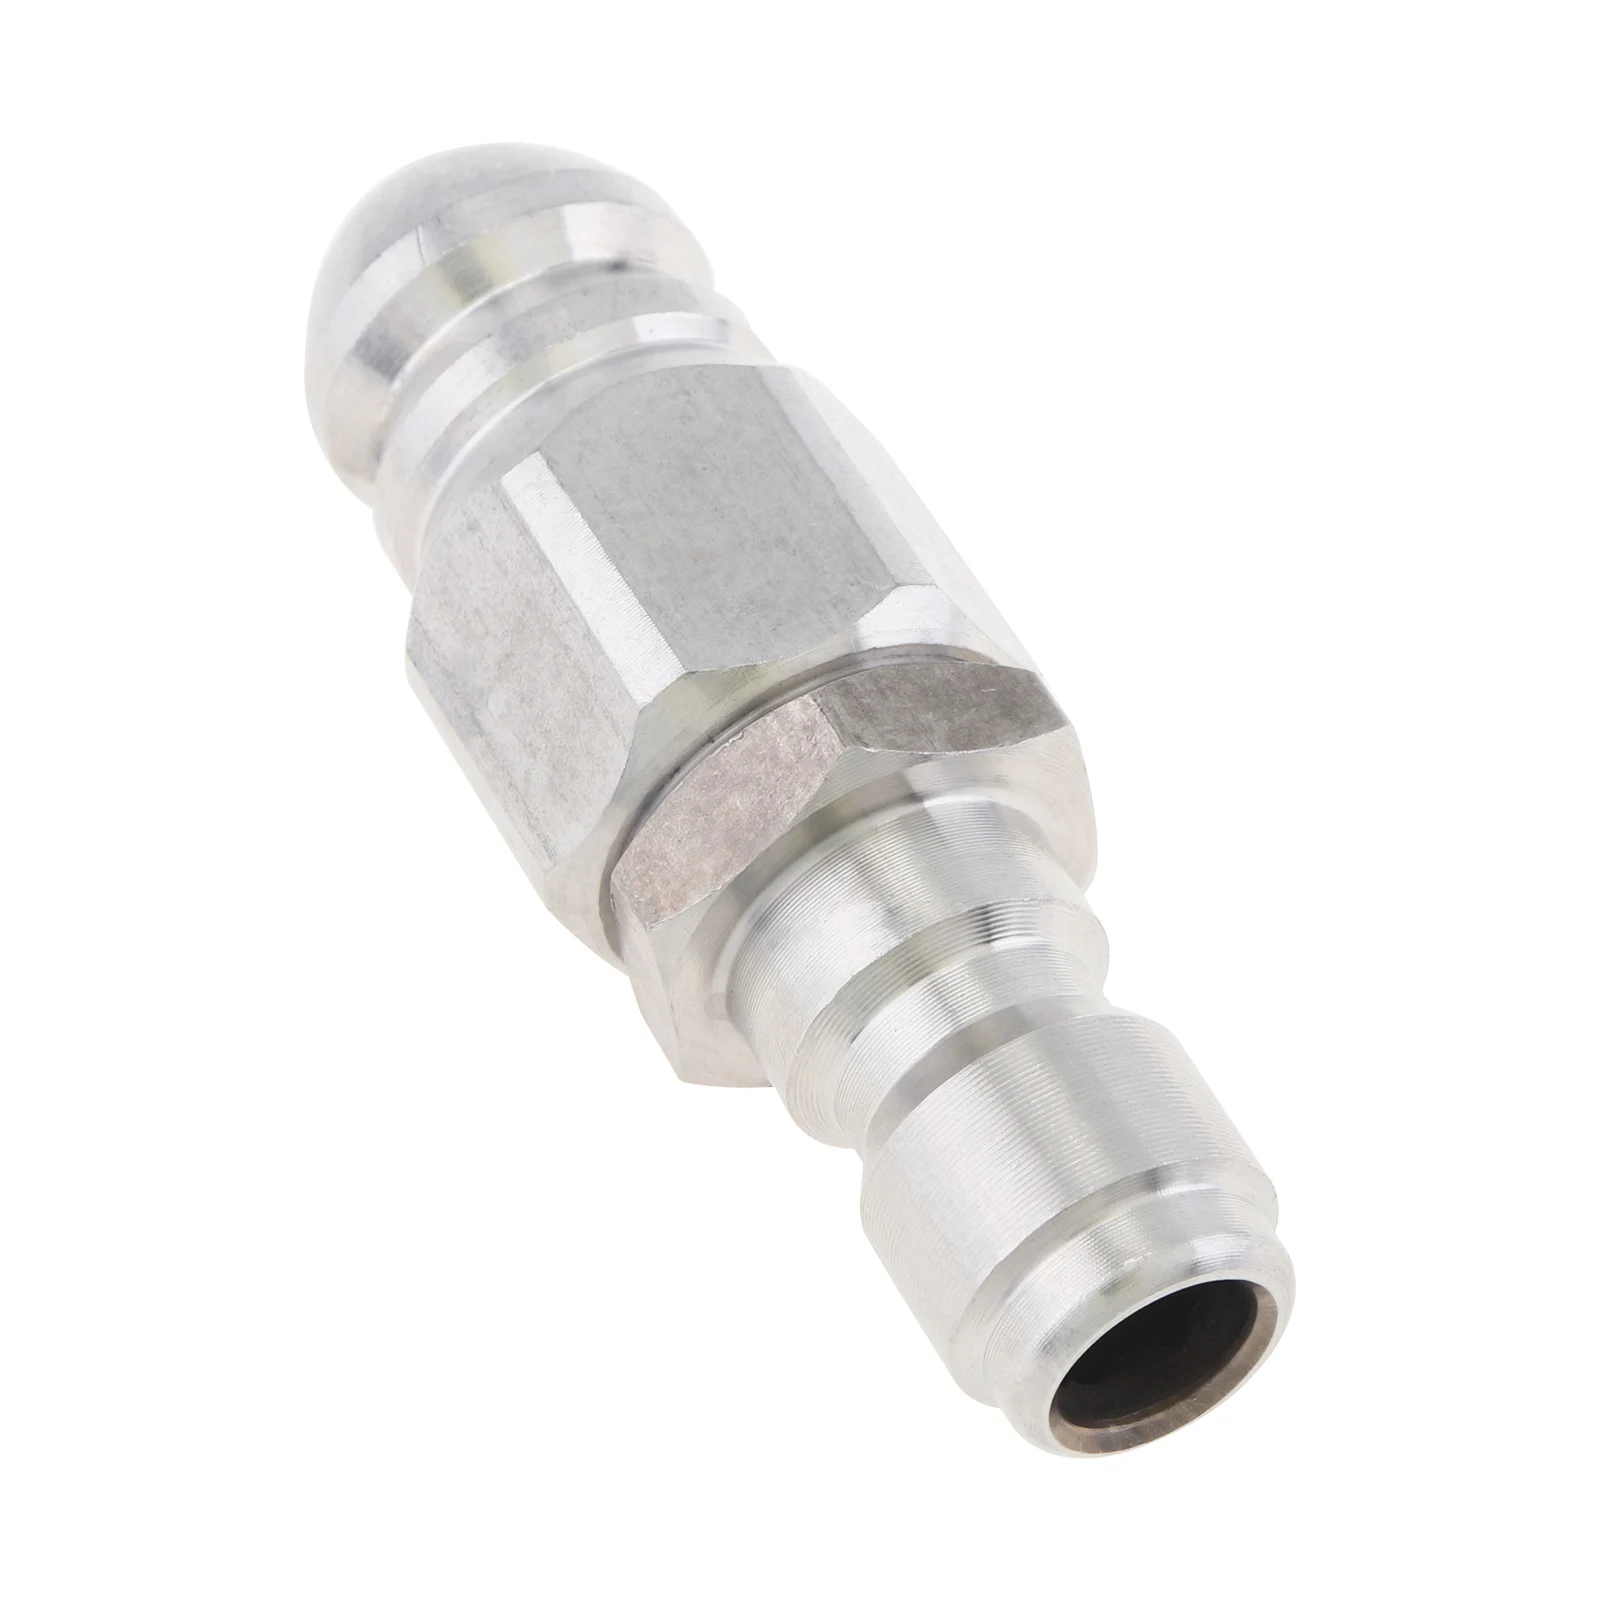 Pressure Washer Sewer Jetter Nozzle Mini Compact Quickly Connector for Drain Jetting Hose, Pressure Drain Jetter Hose Nozzle original hose for xiaomi jimmy jw31 cordless pressure washer white